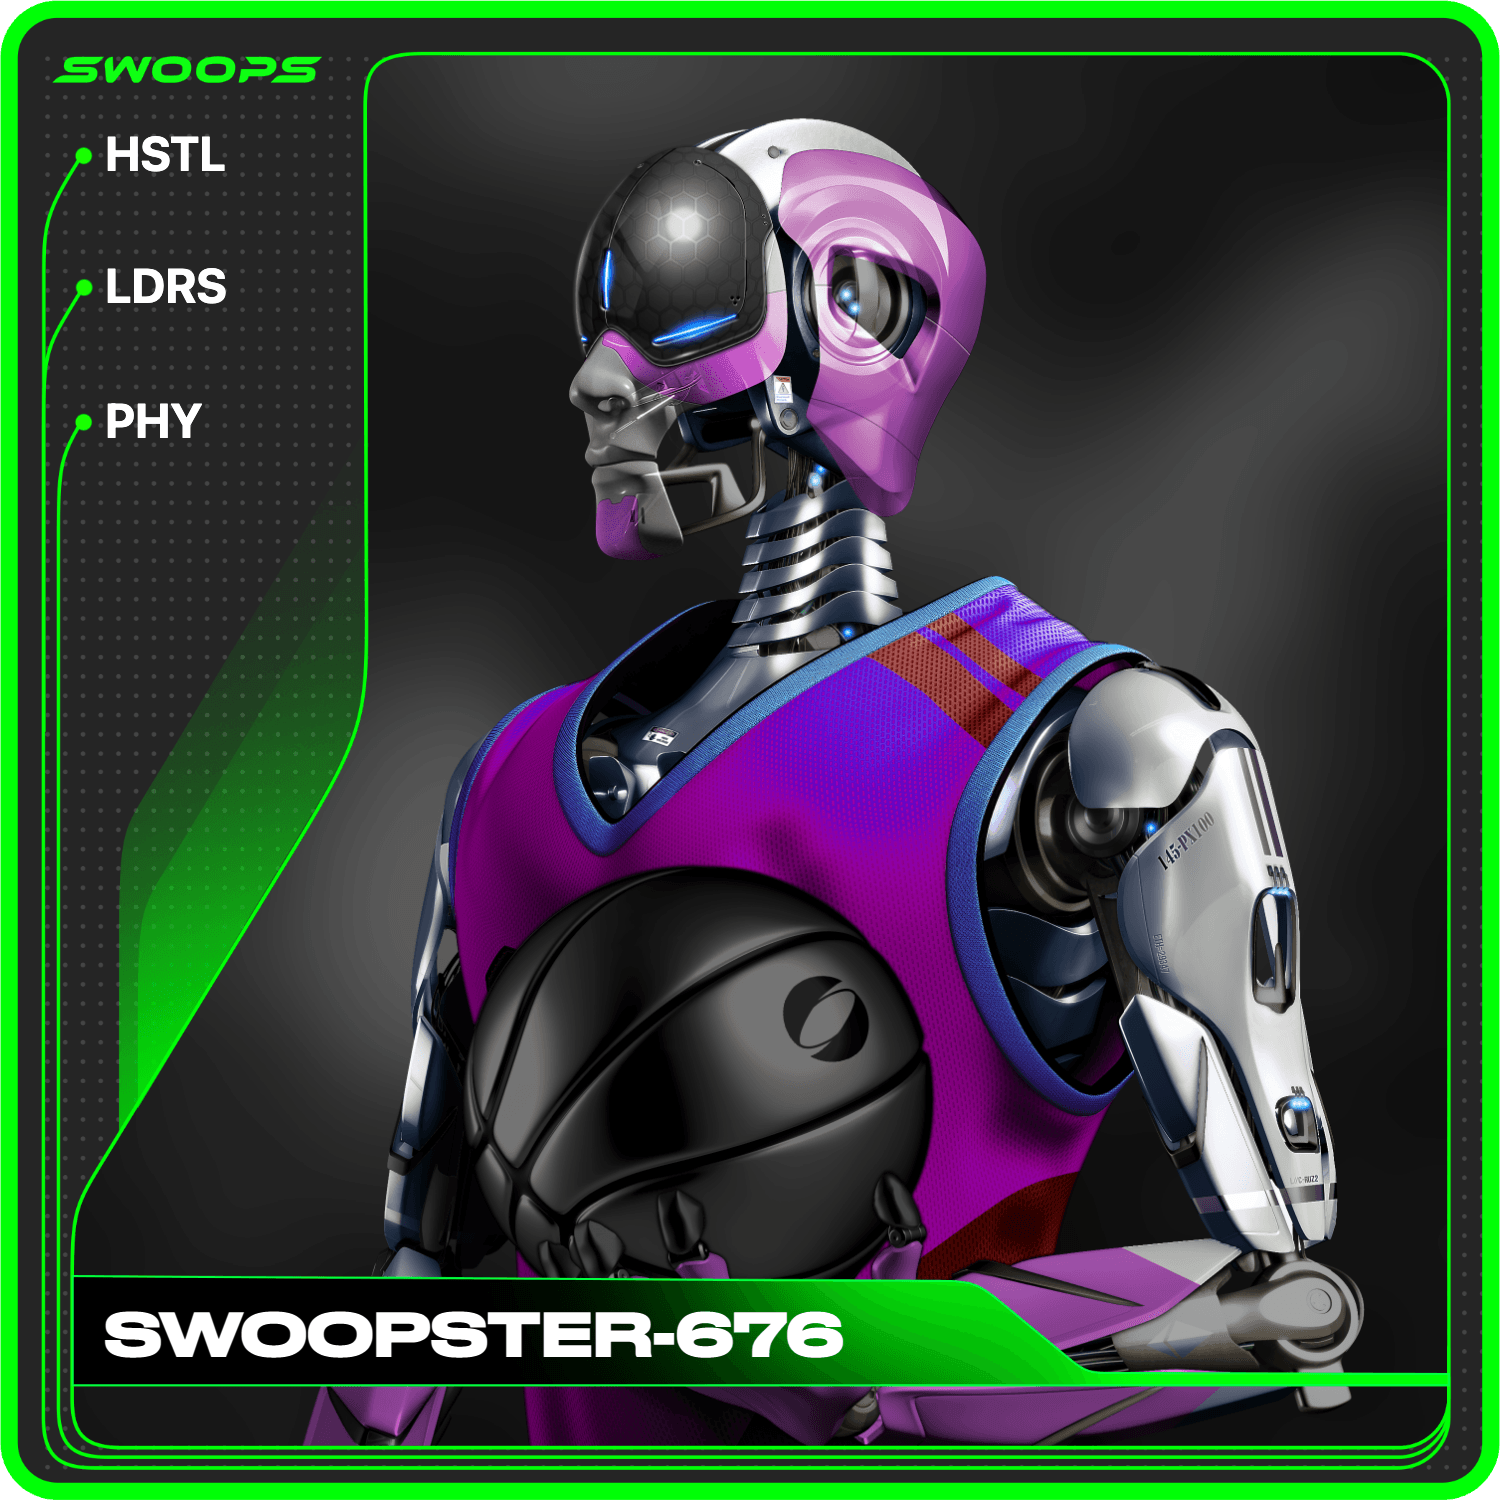 SWOOPSTER-676